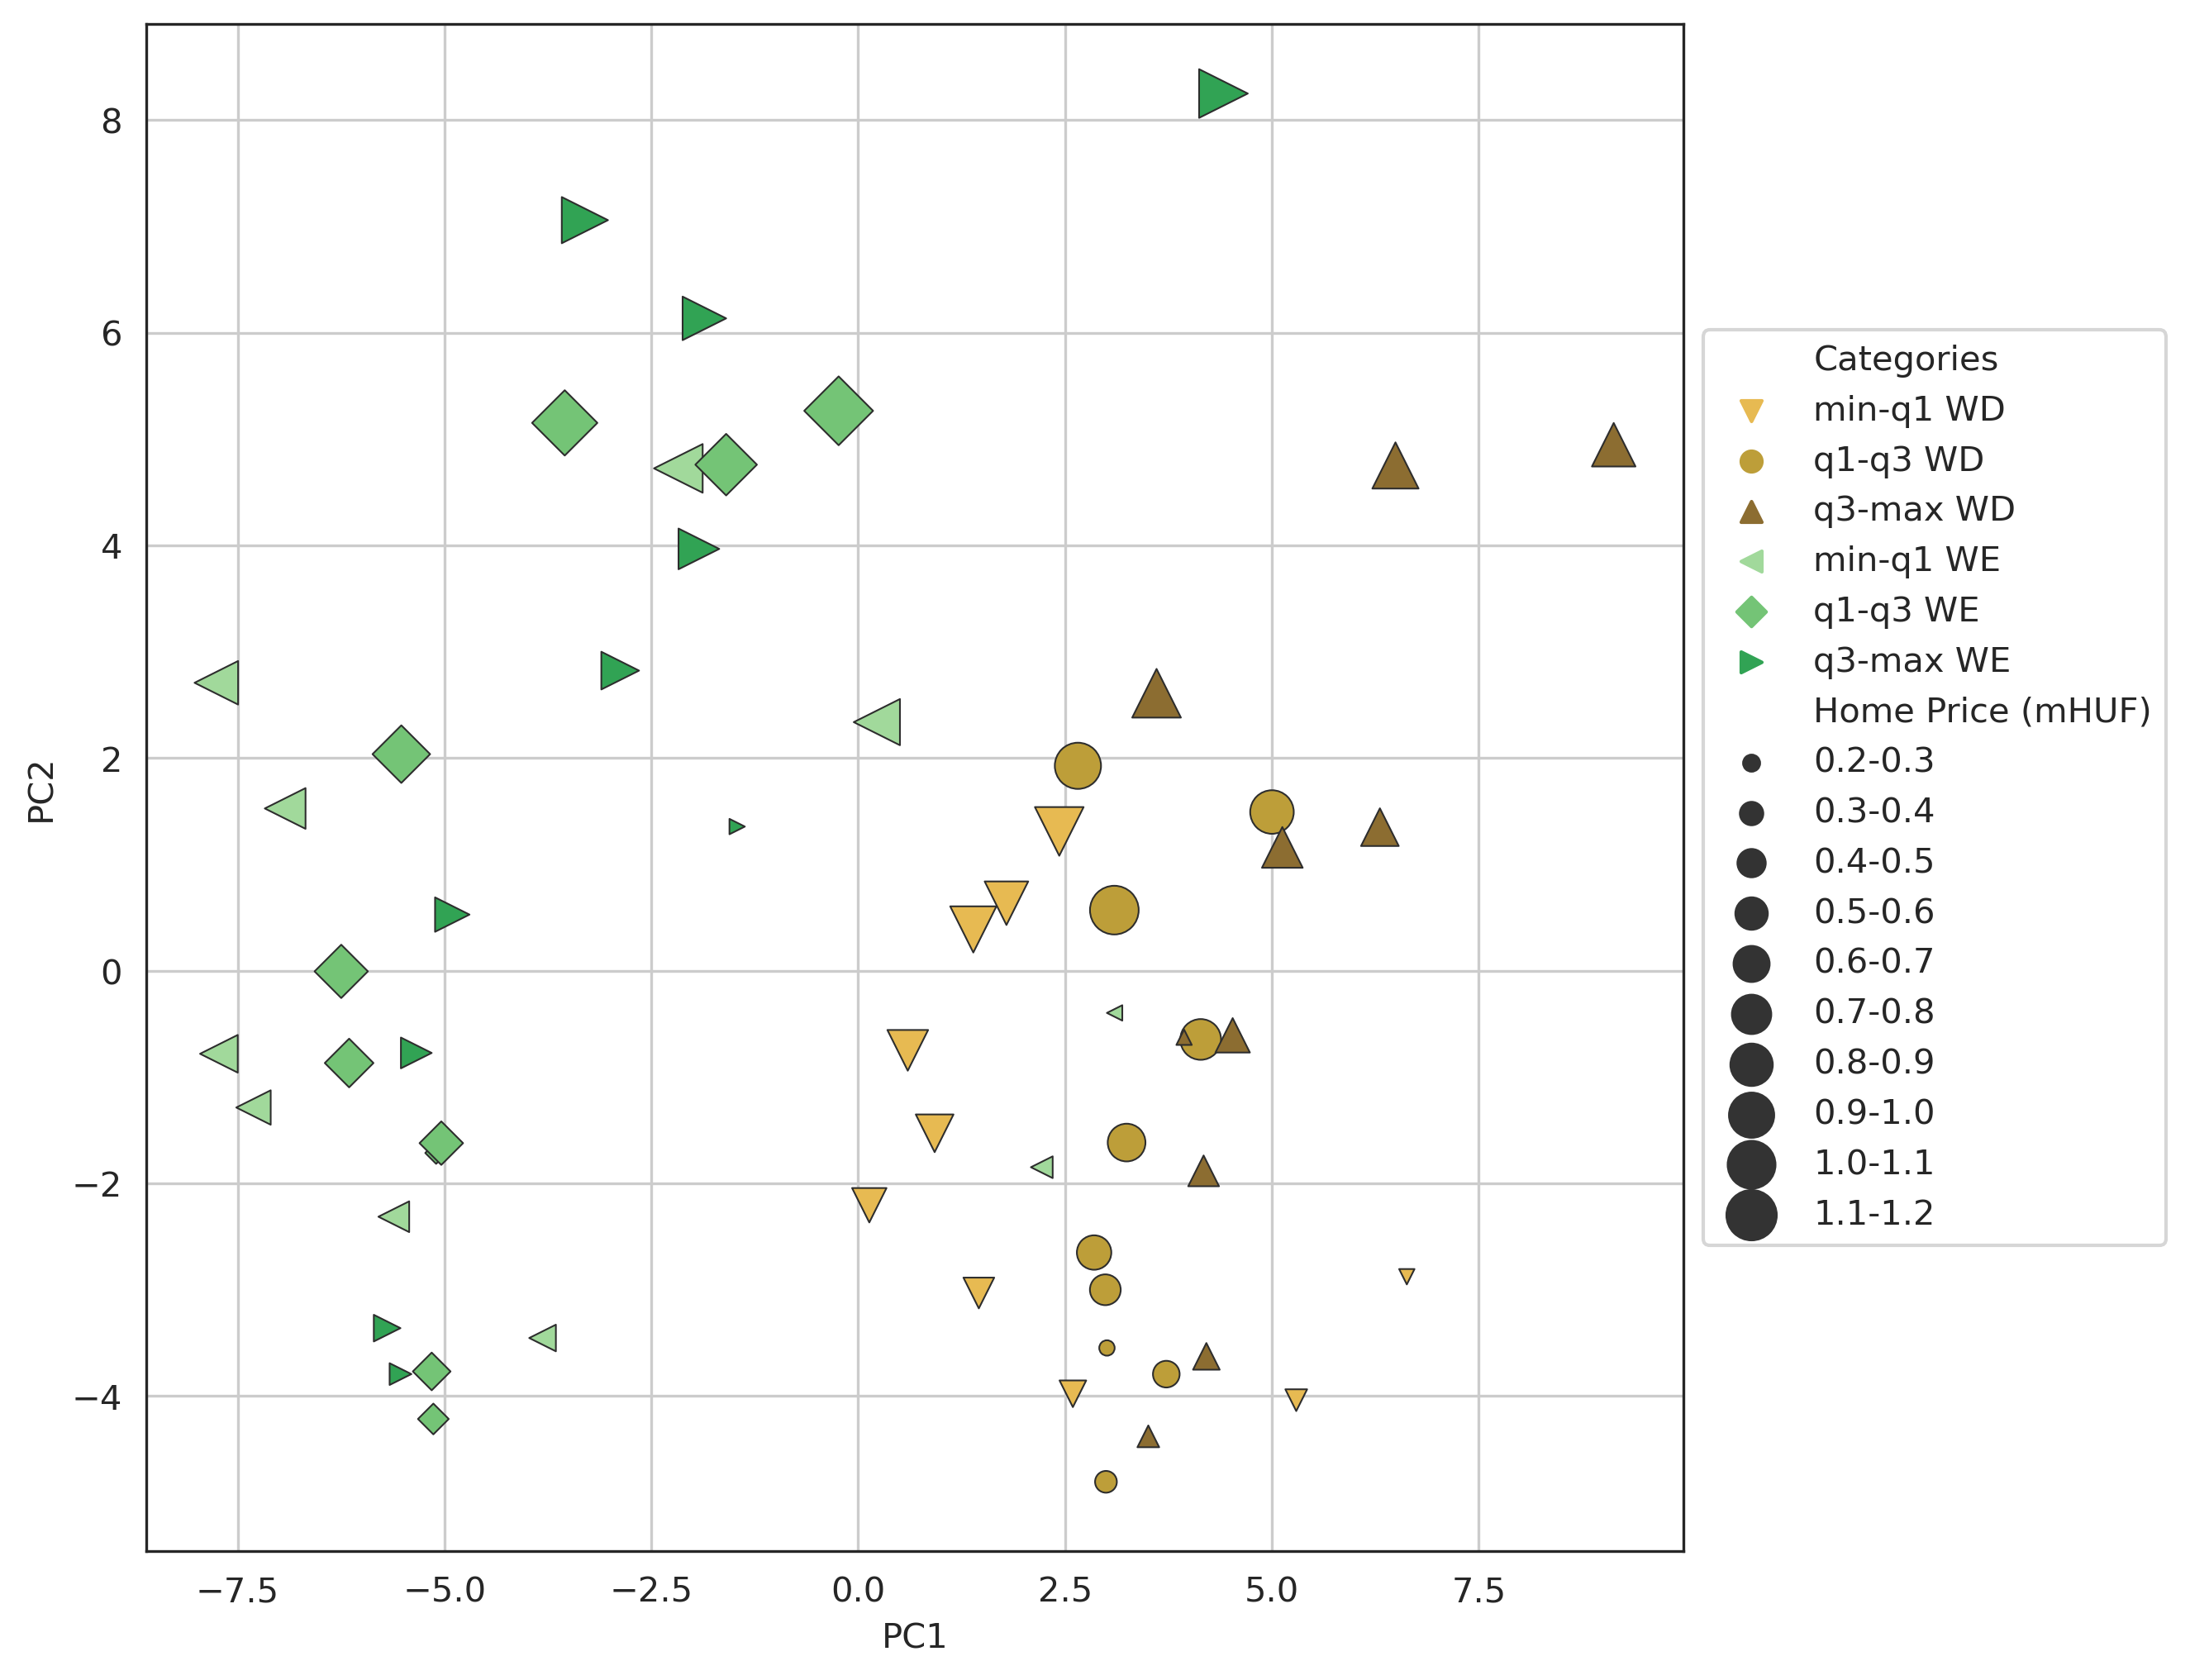 Scatter plot of the 2-component Principal Component Analysis. Marker sizes indicates the home price category, the color/type work price category and also the day type (Weekday/Weekend).